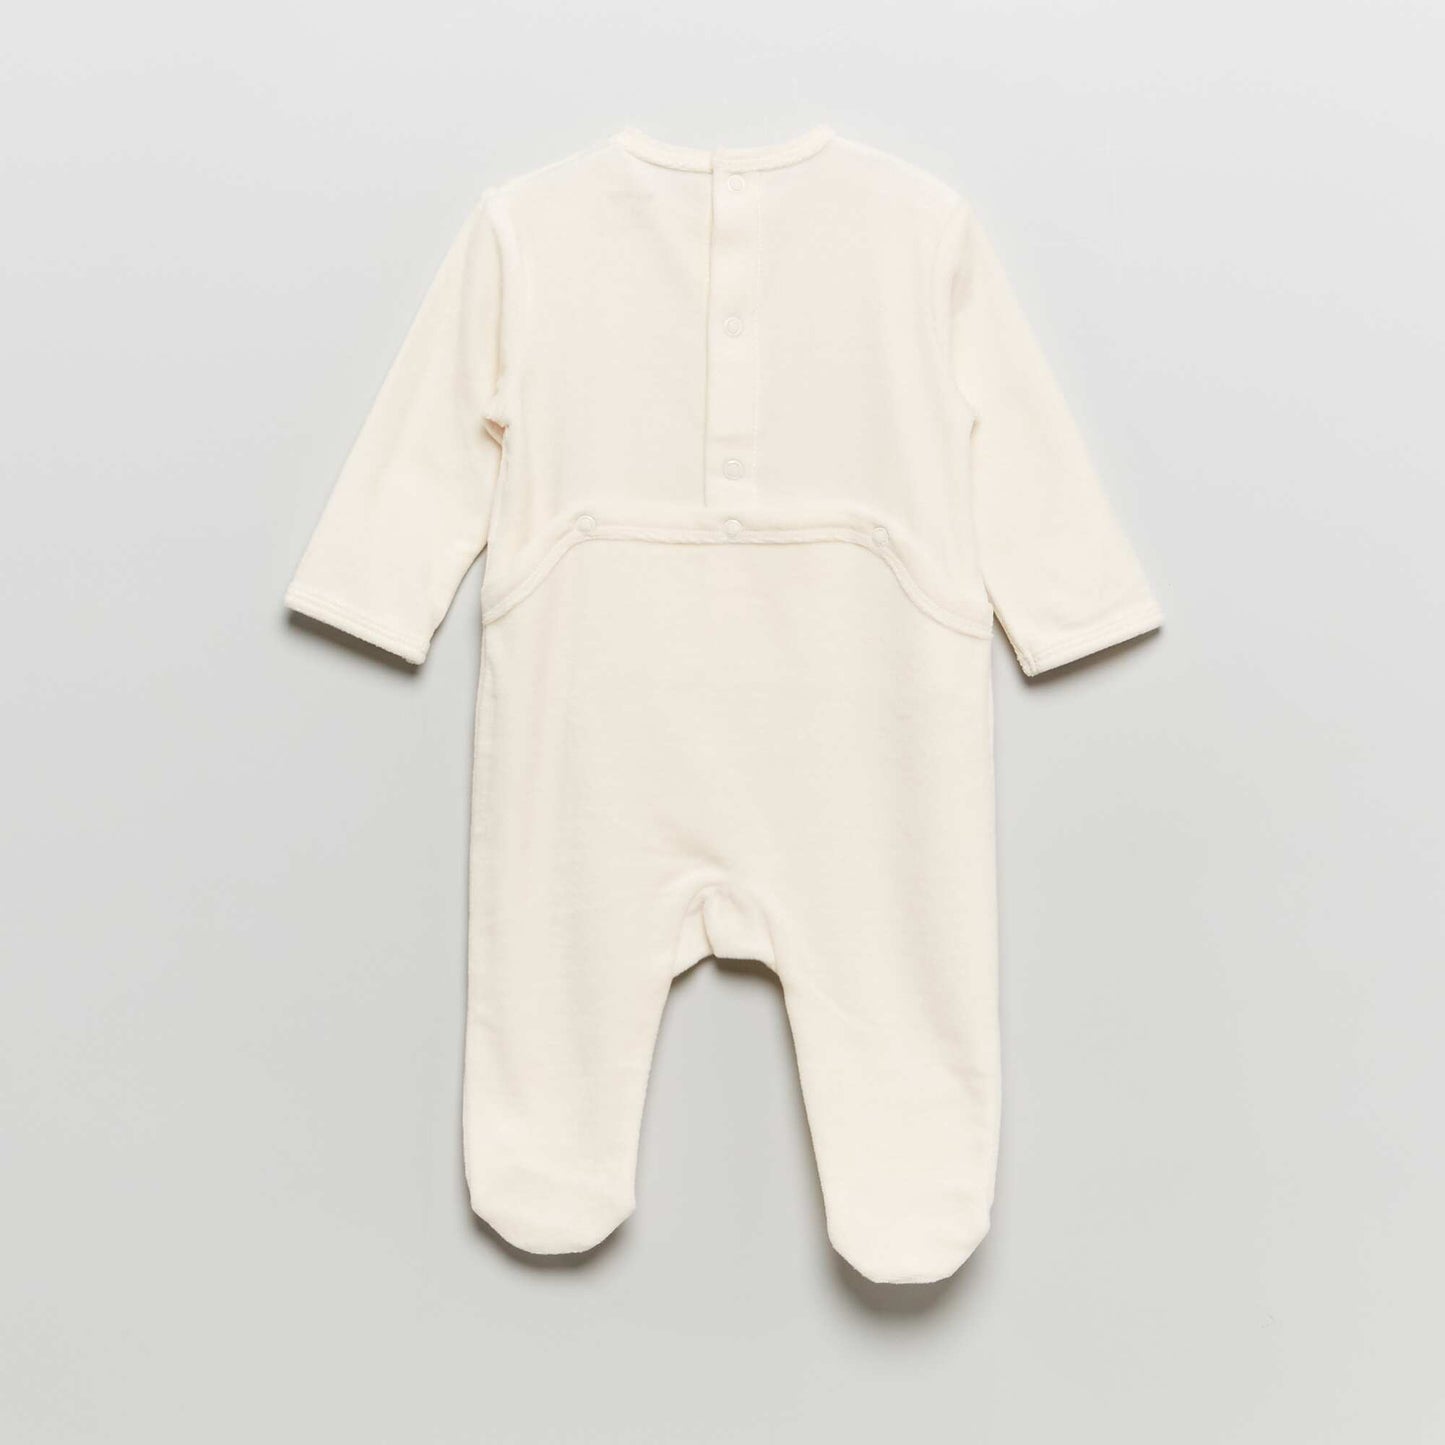 Velour sleepsuit with printed lettering WHITE